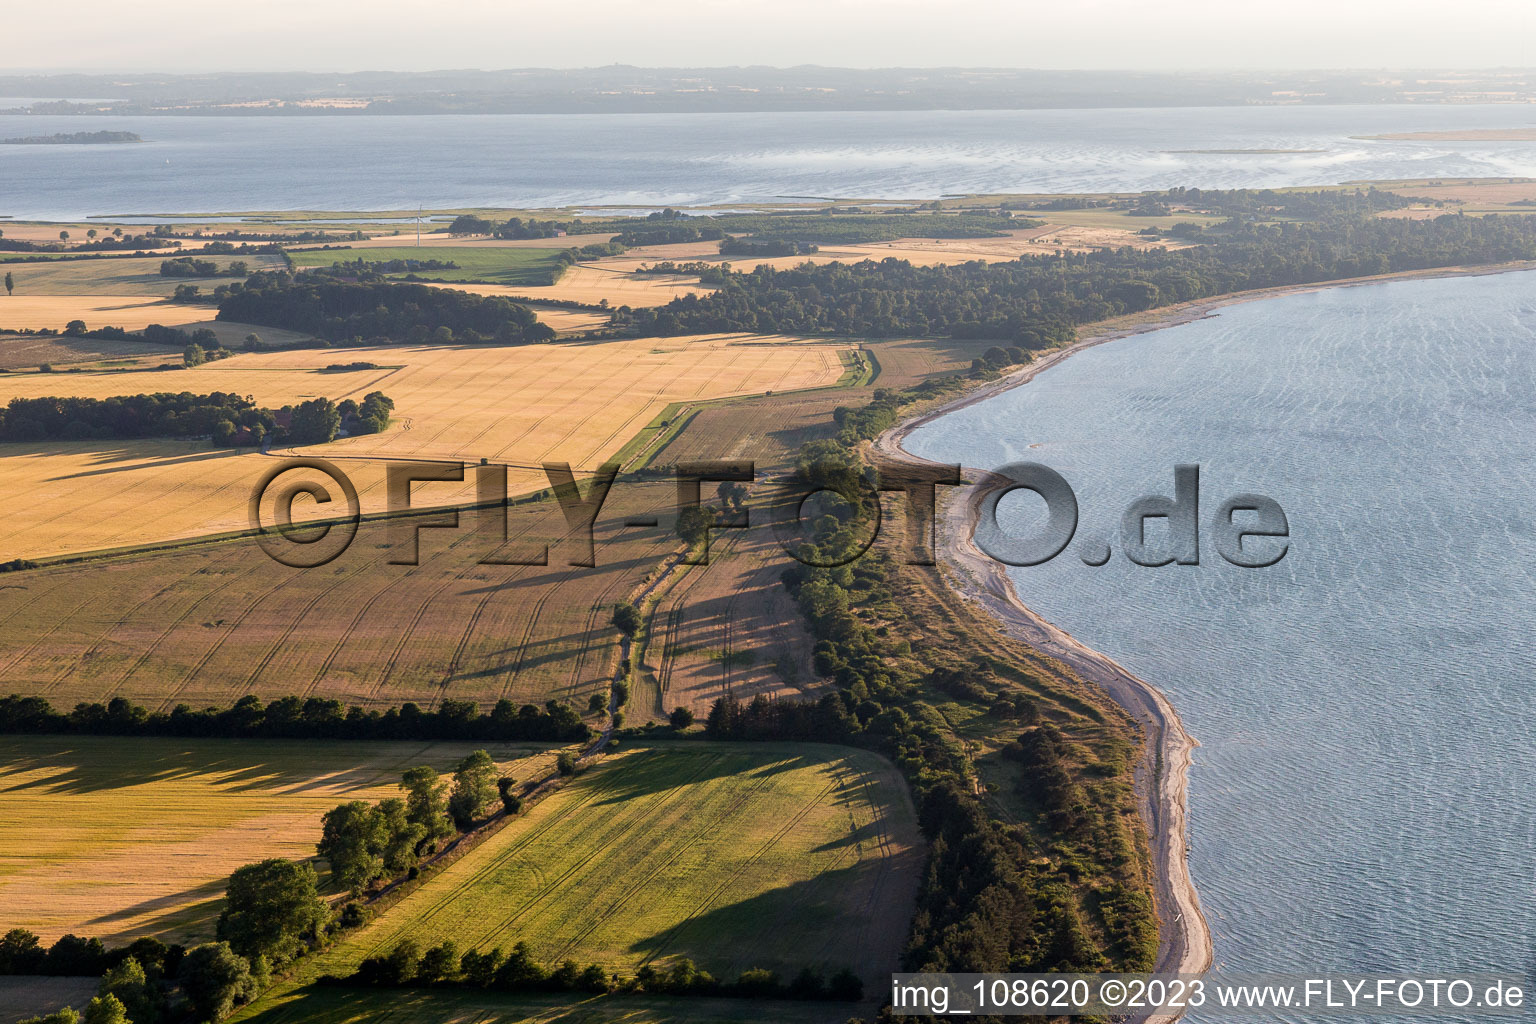 Stege in the state Zealand, Denmark seen from above